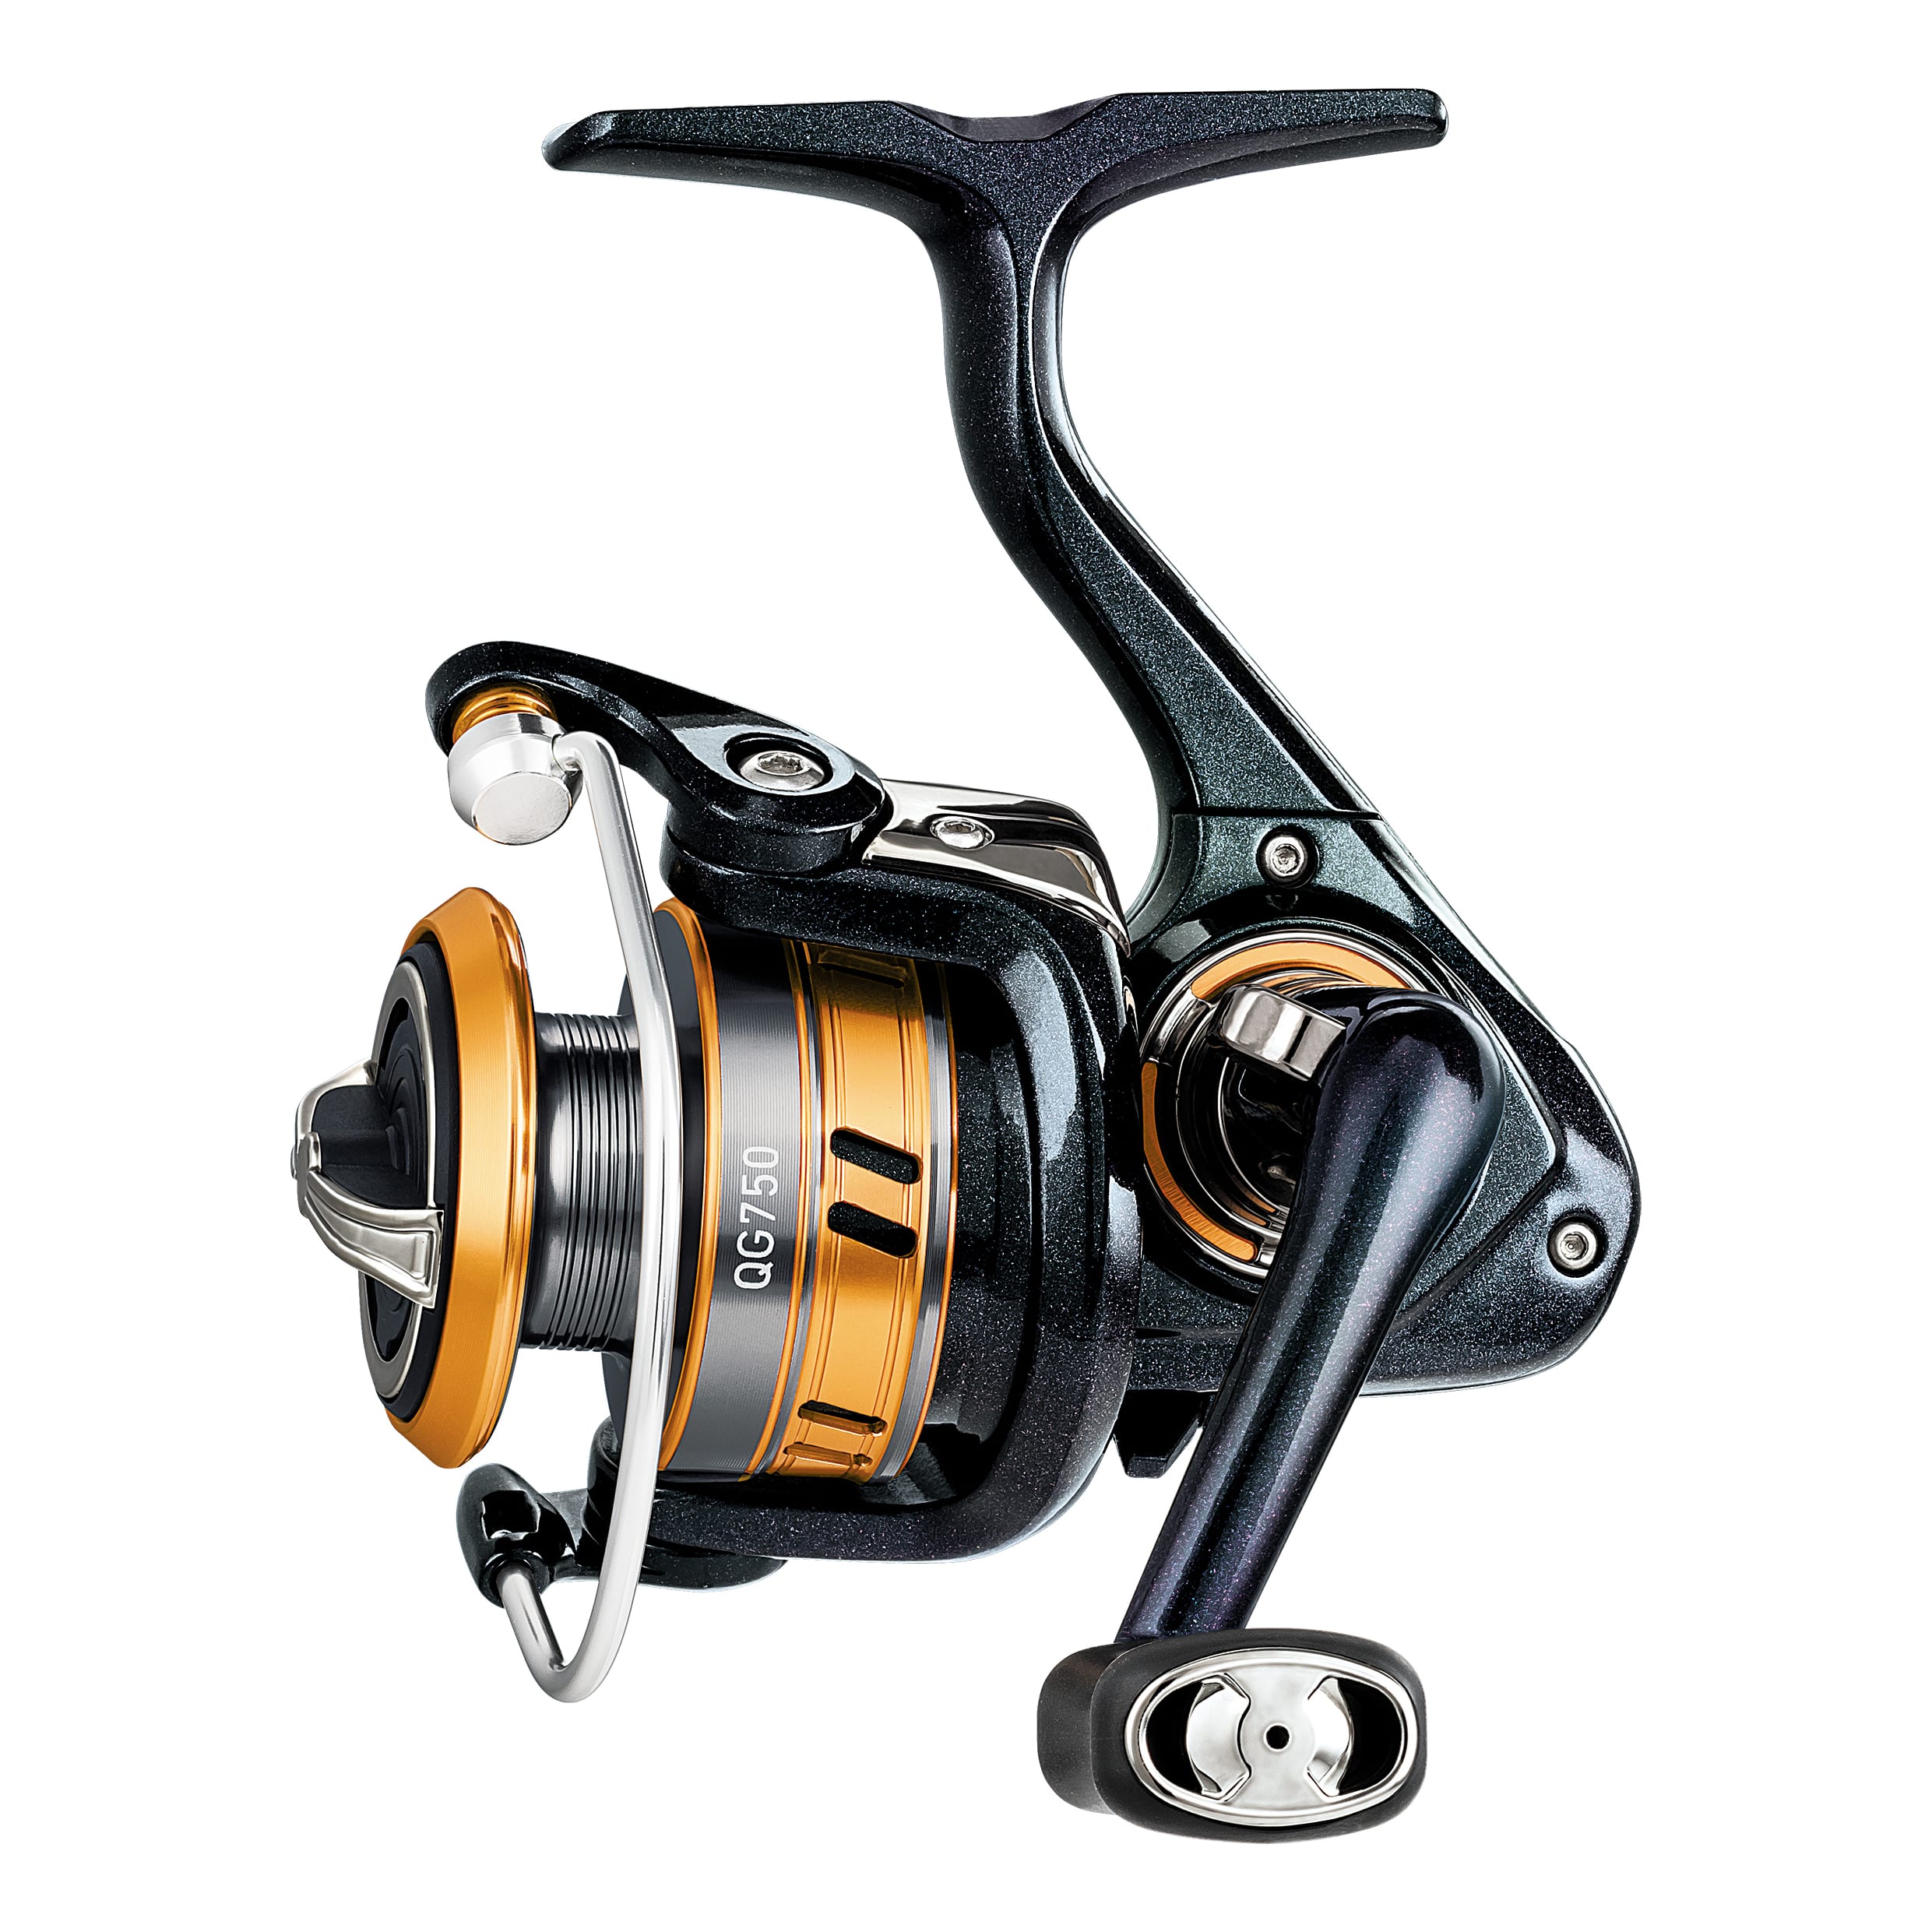  Fishing Reel 2+ 1BB Lightweight Ultra Smooth Aluminum Spinning  Fishing Reel Freshwater and Salt Water Baitcasting Reel is perfect for  ultralight/ice fishing,DS5000 : Sports & Outdoors